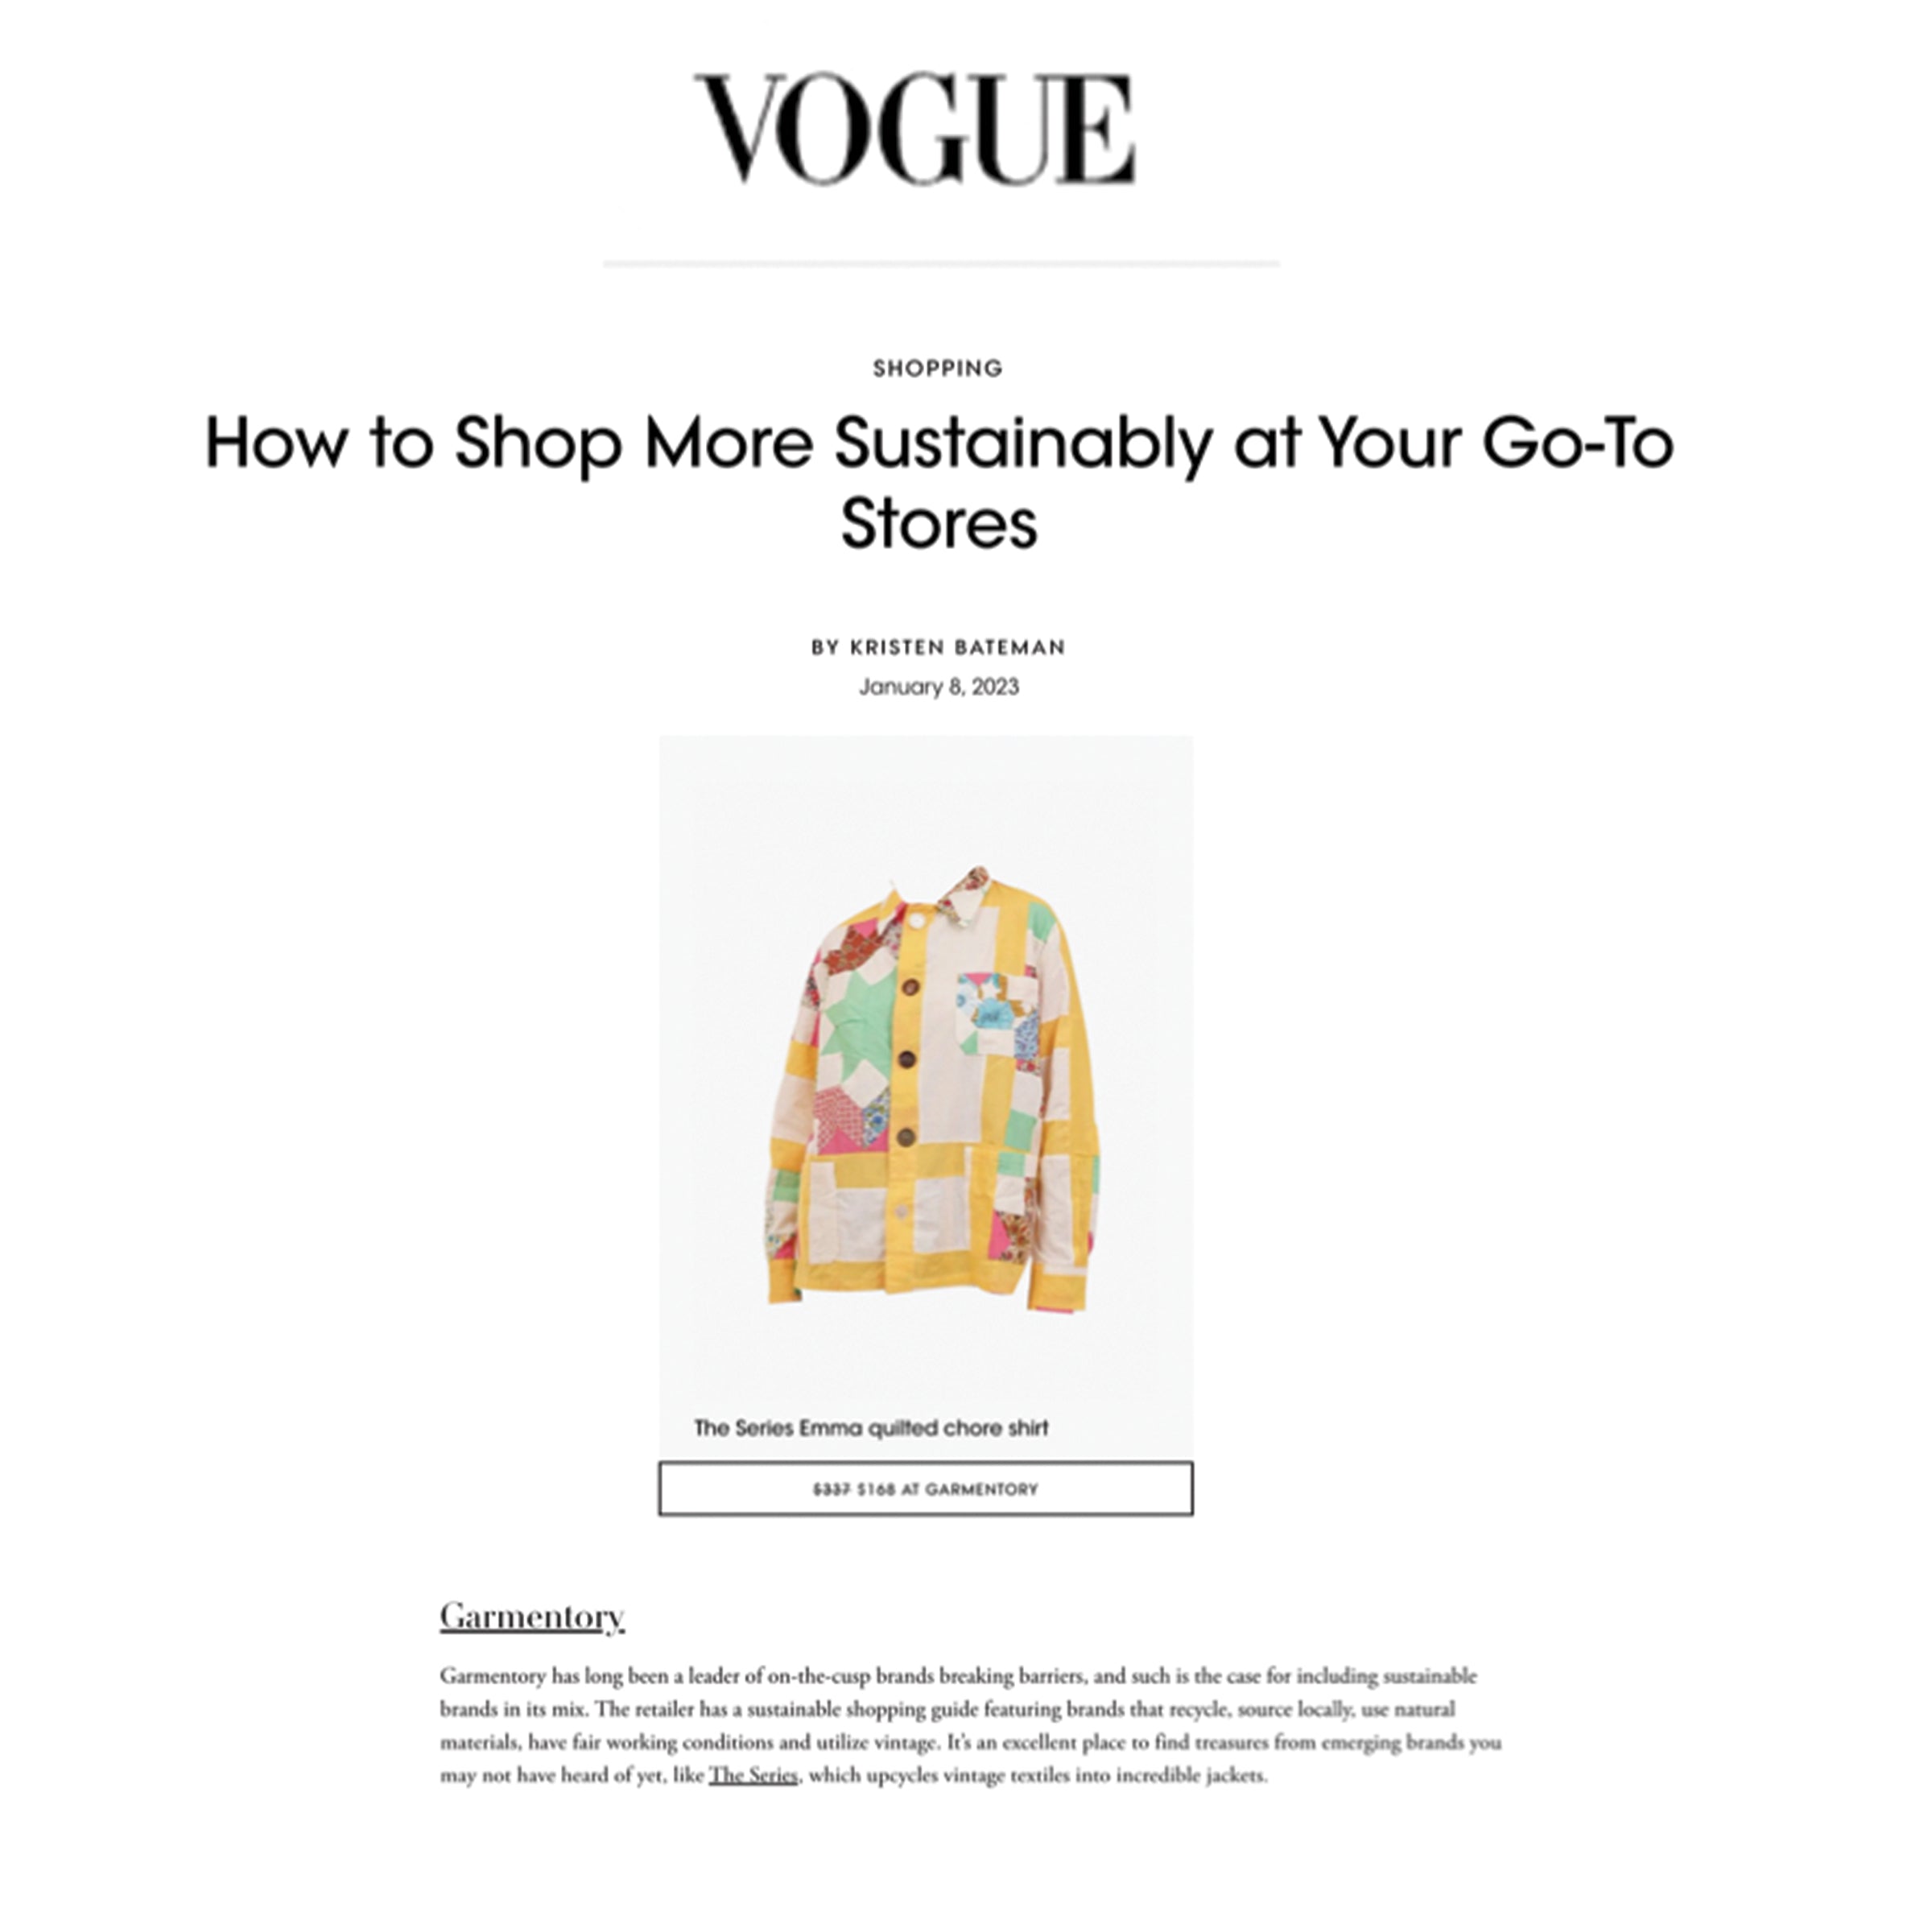 VOGUE | How to Shop More Sustainably at Your Go-To Stores